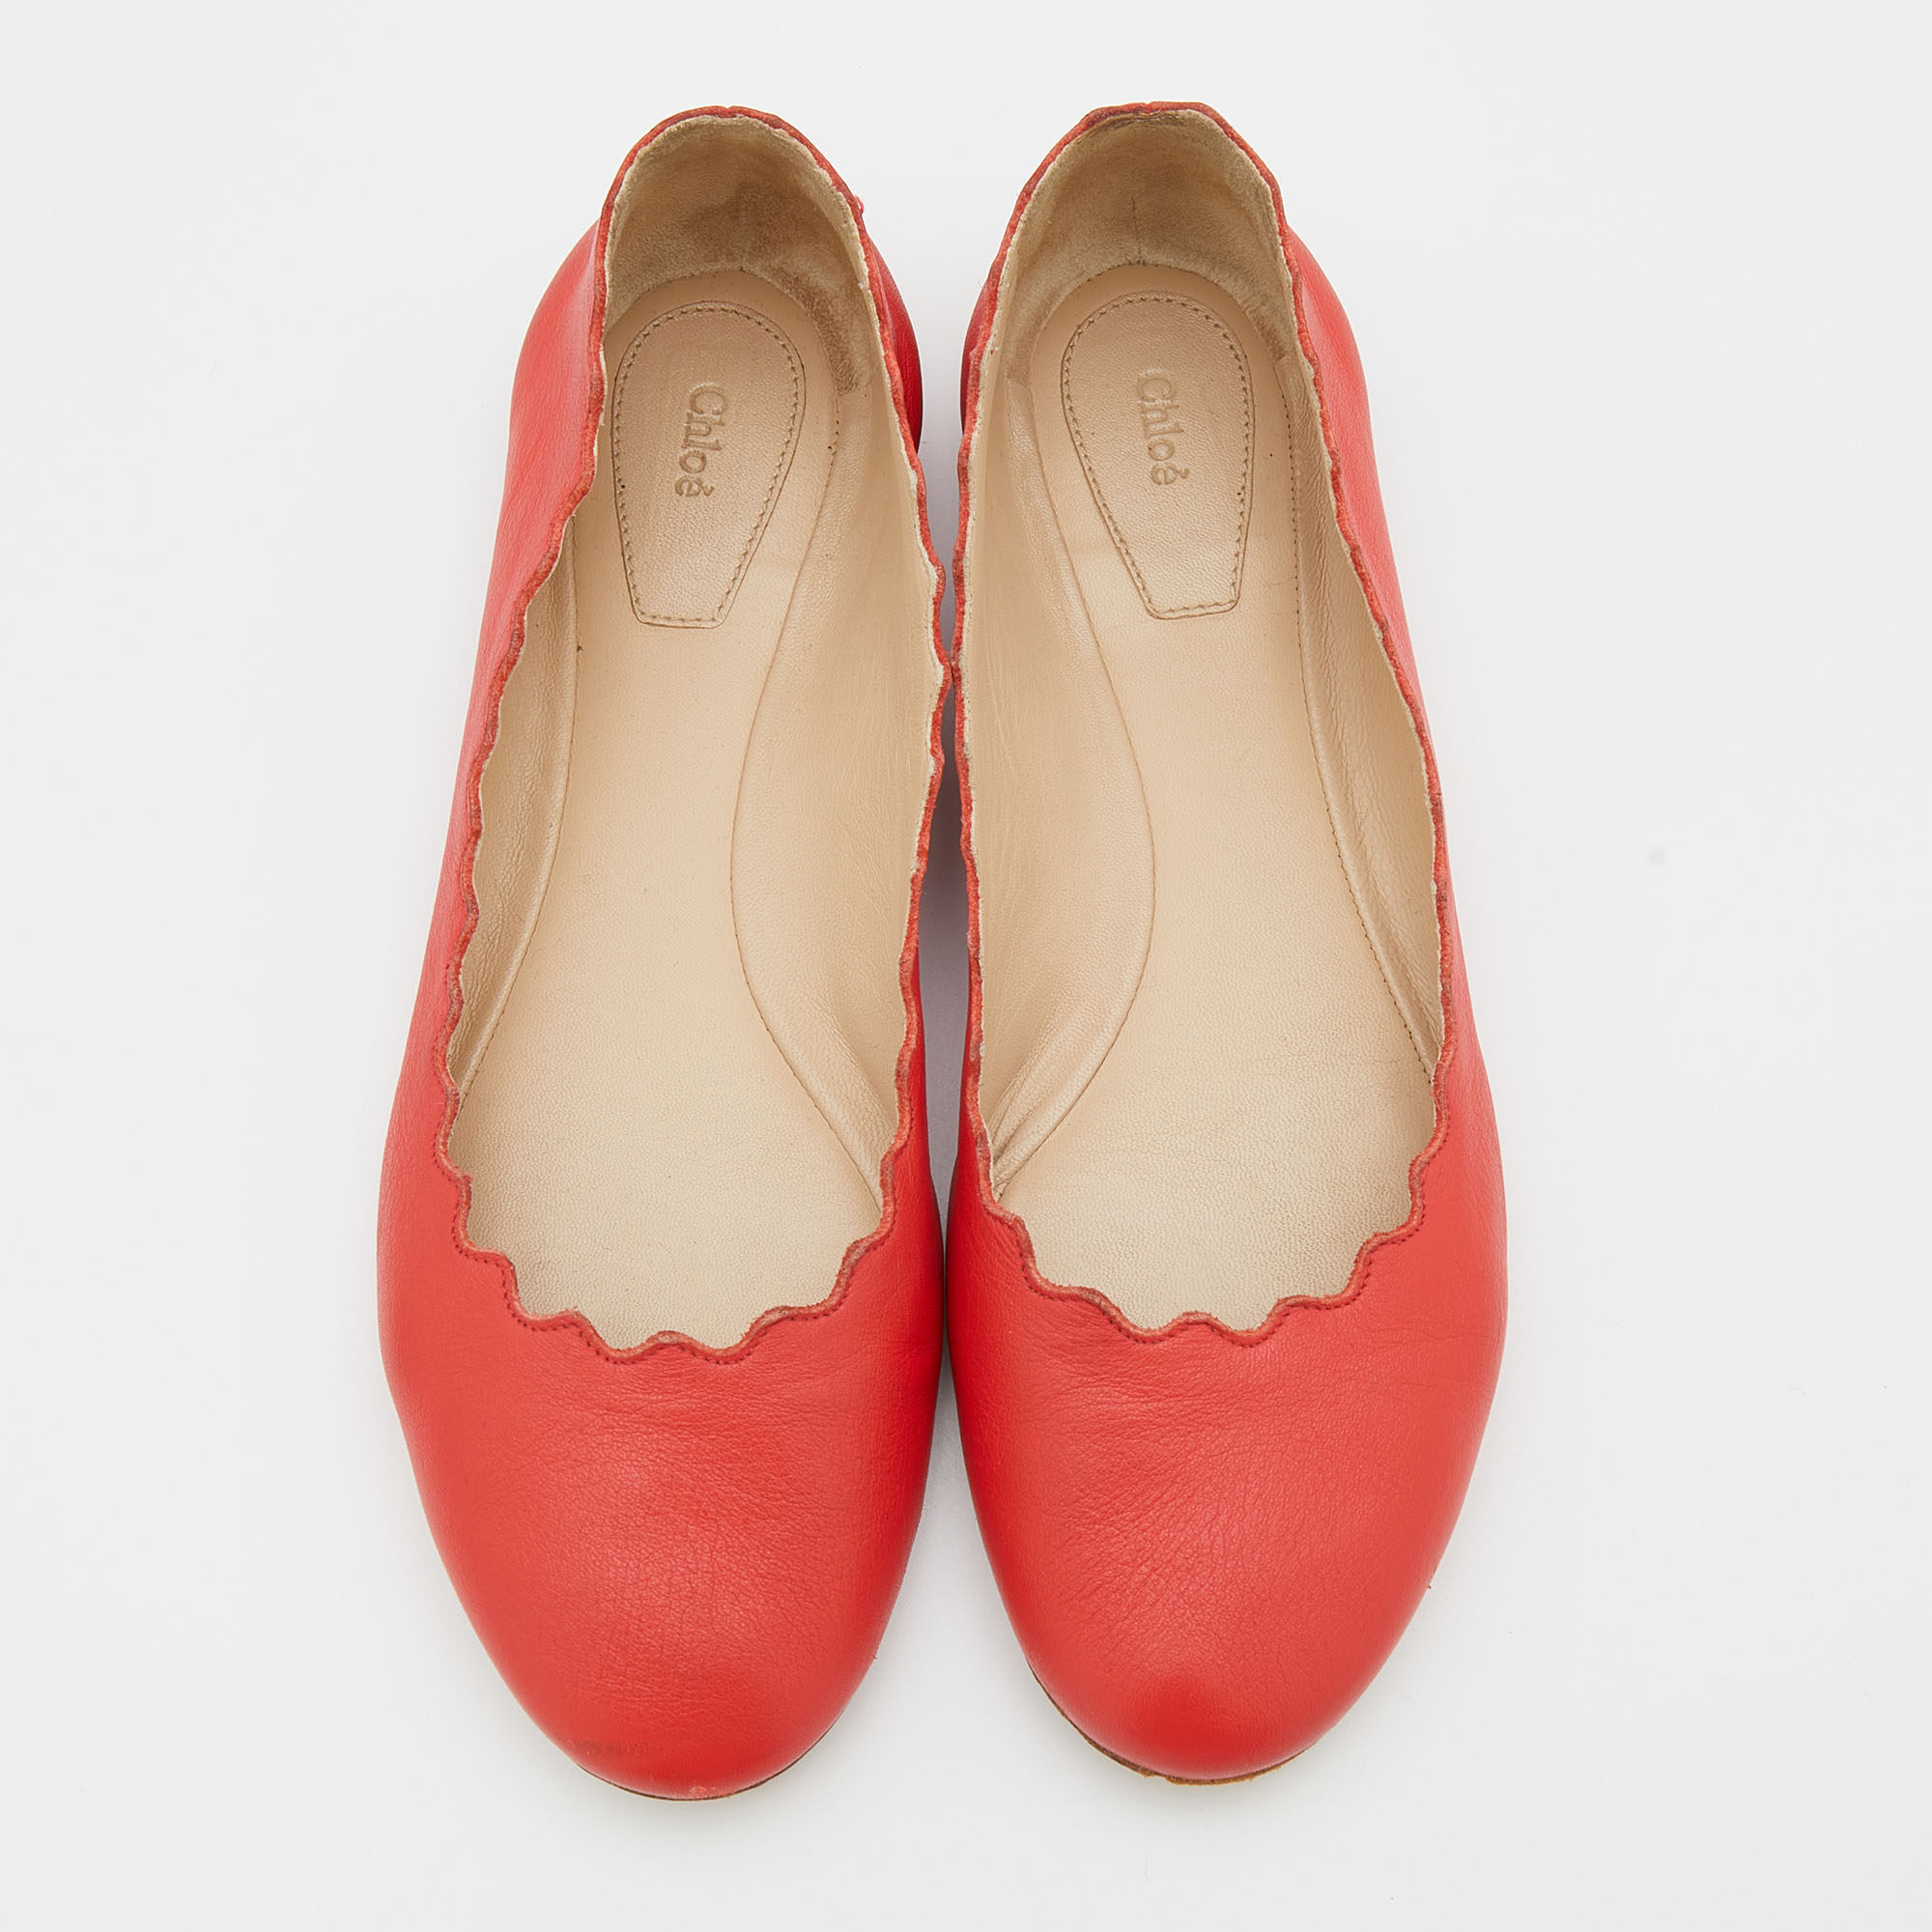 Chloe Coral Red Leather Lauren Scalloped Ballet Flats Size 36.5